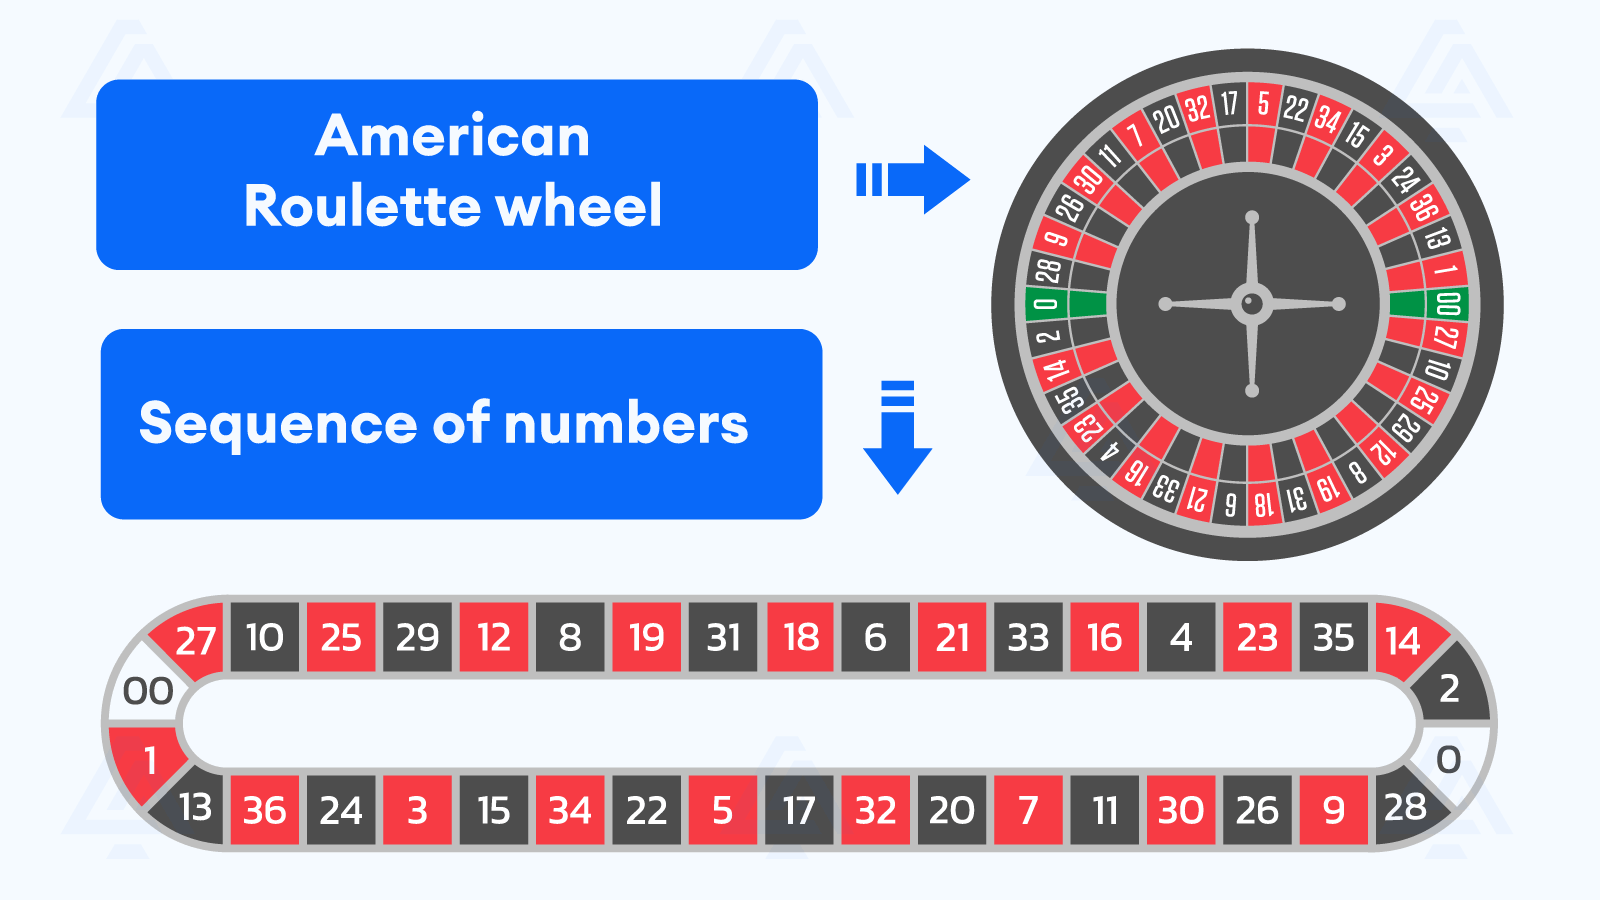 Understand the American Roulette wheel